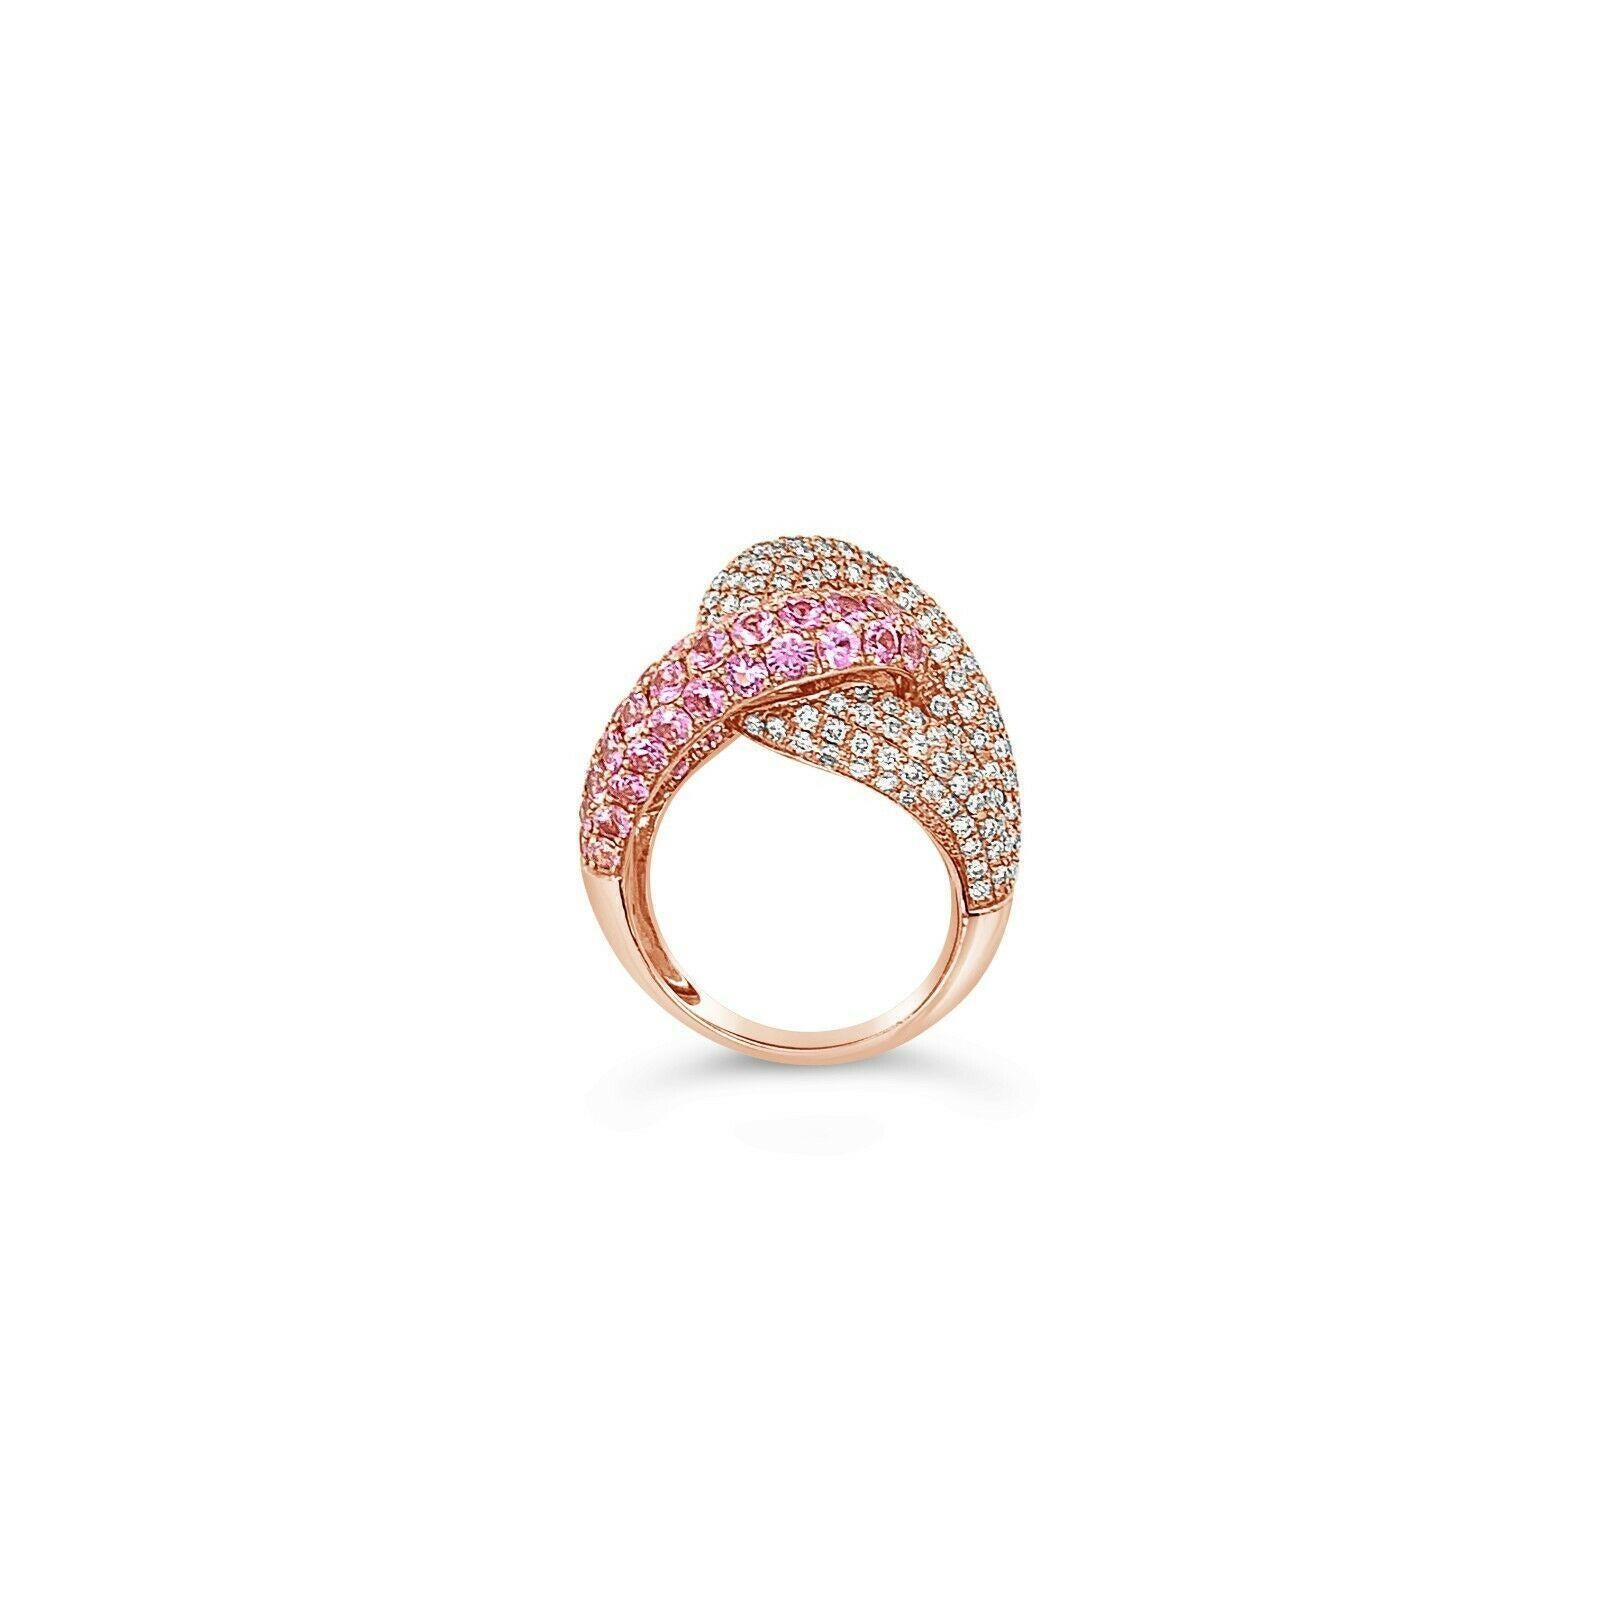 Le Vian Ring w/ Pink Sapphire, Vanilla Diamonds Set in 14K Strawberry Gold In New Condition For Sale In Great Neck, NY